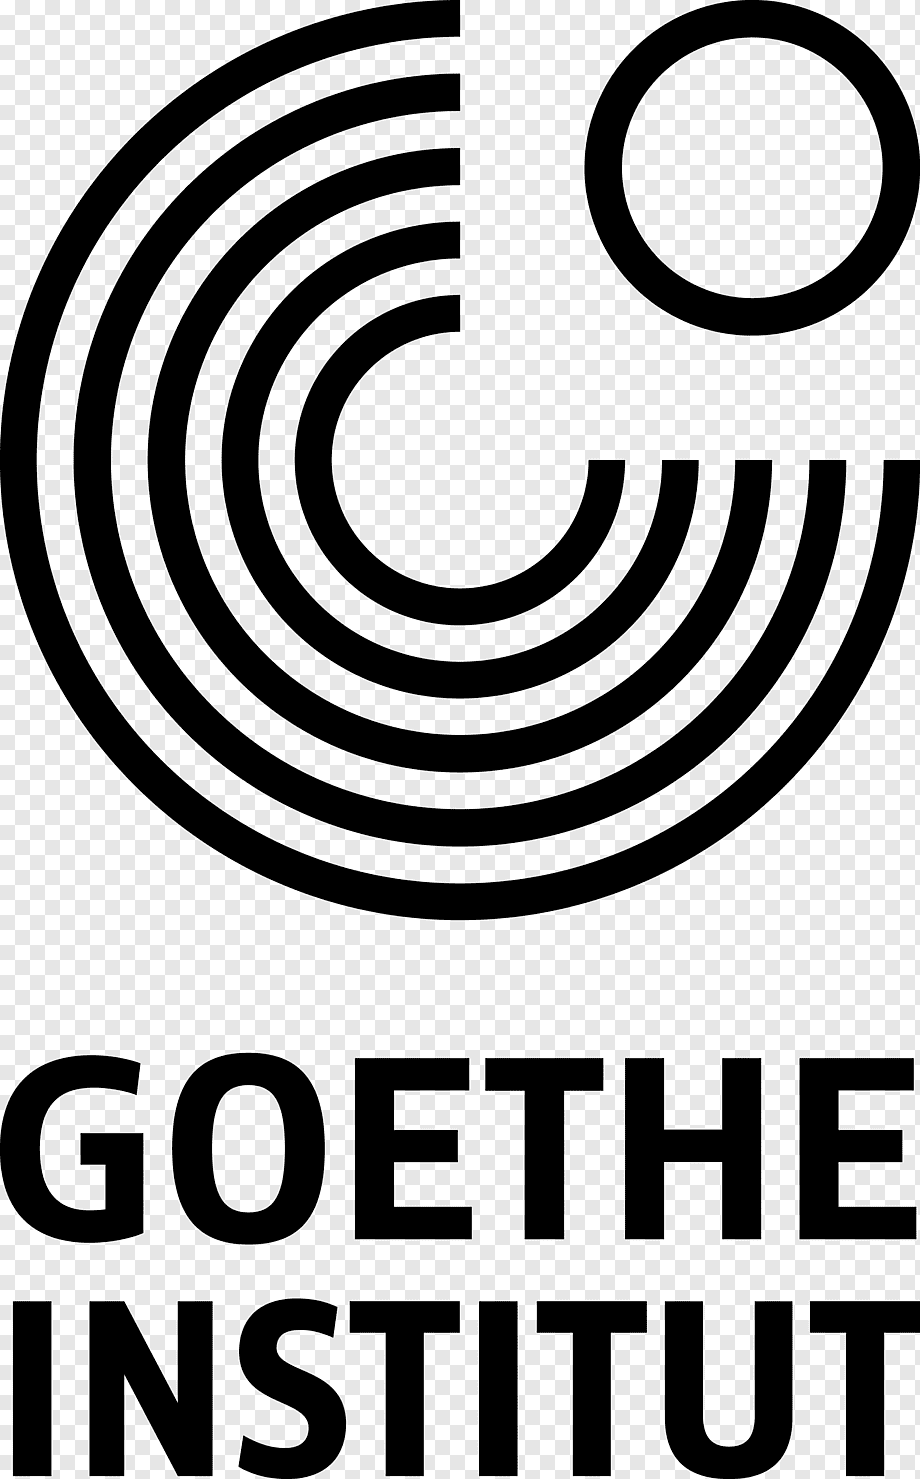 png-transparent-goethe-institut-boston-germany-art-film-others-english-culture-text.png